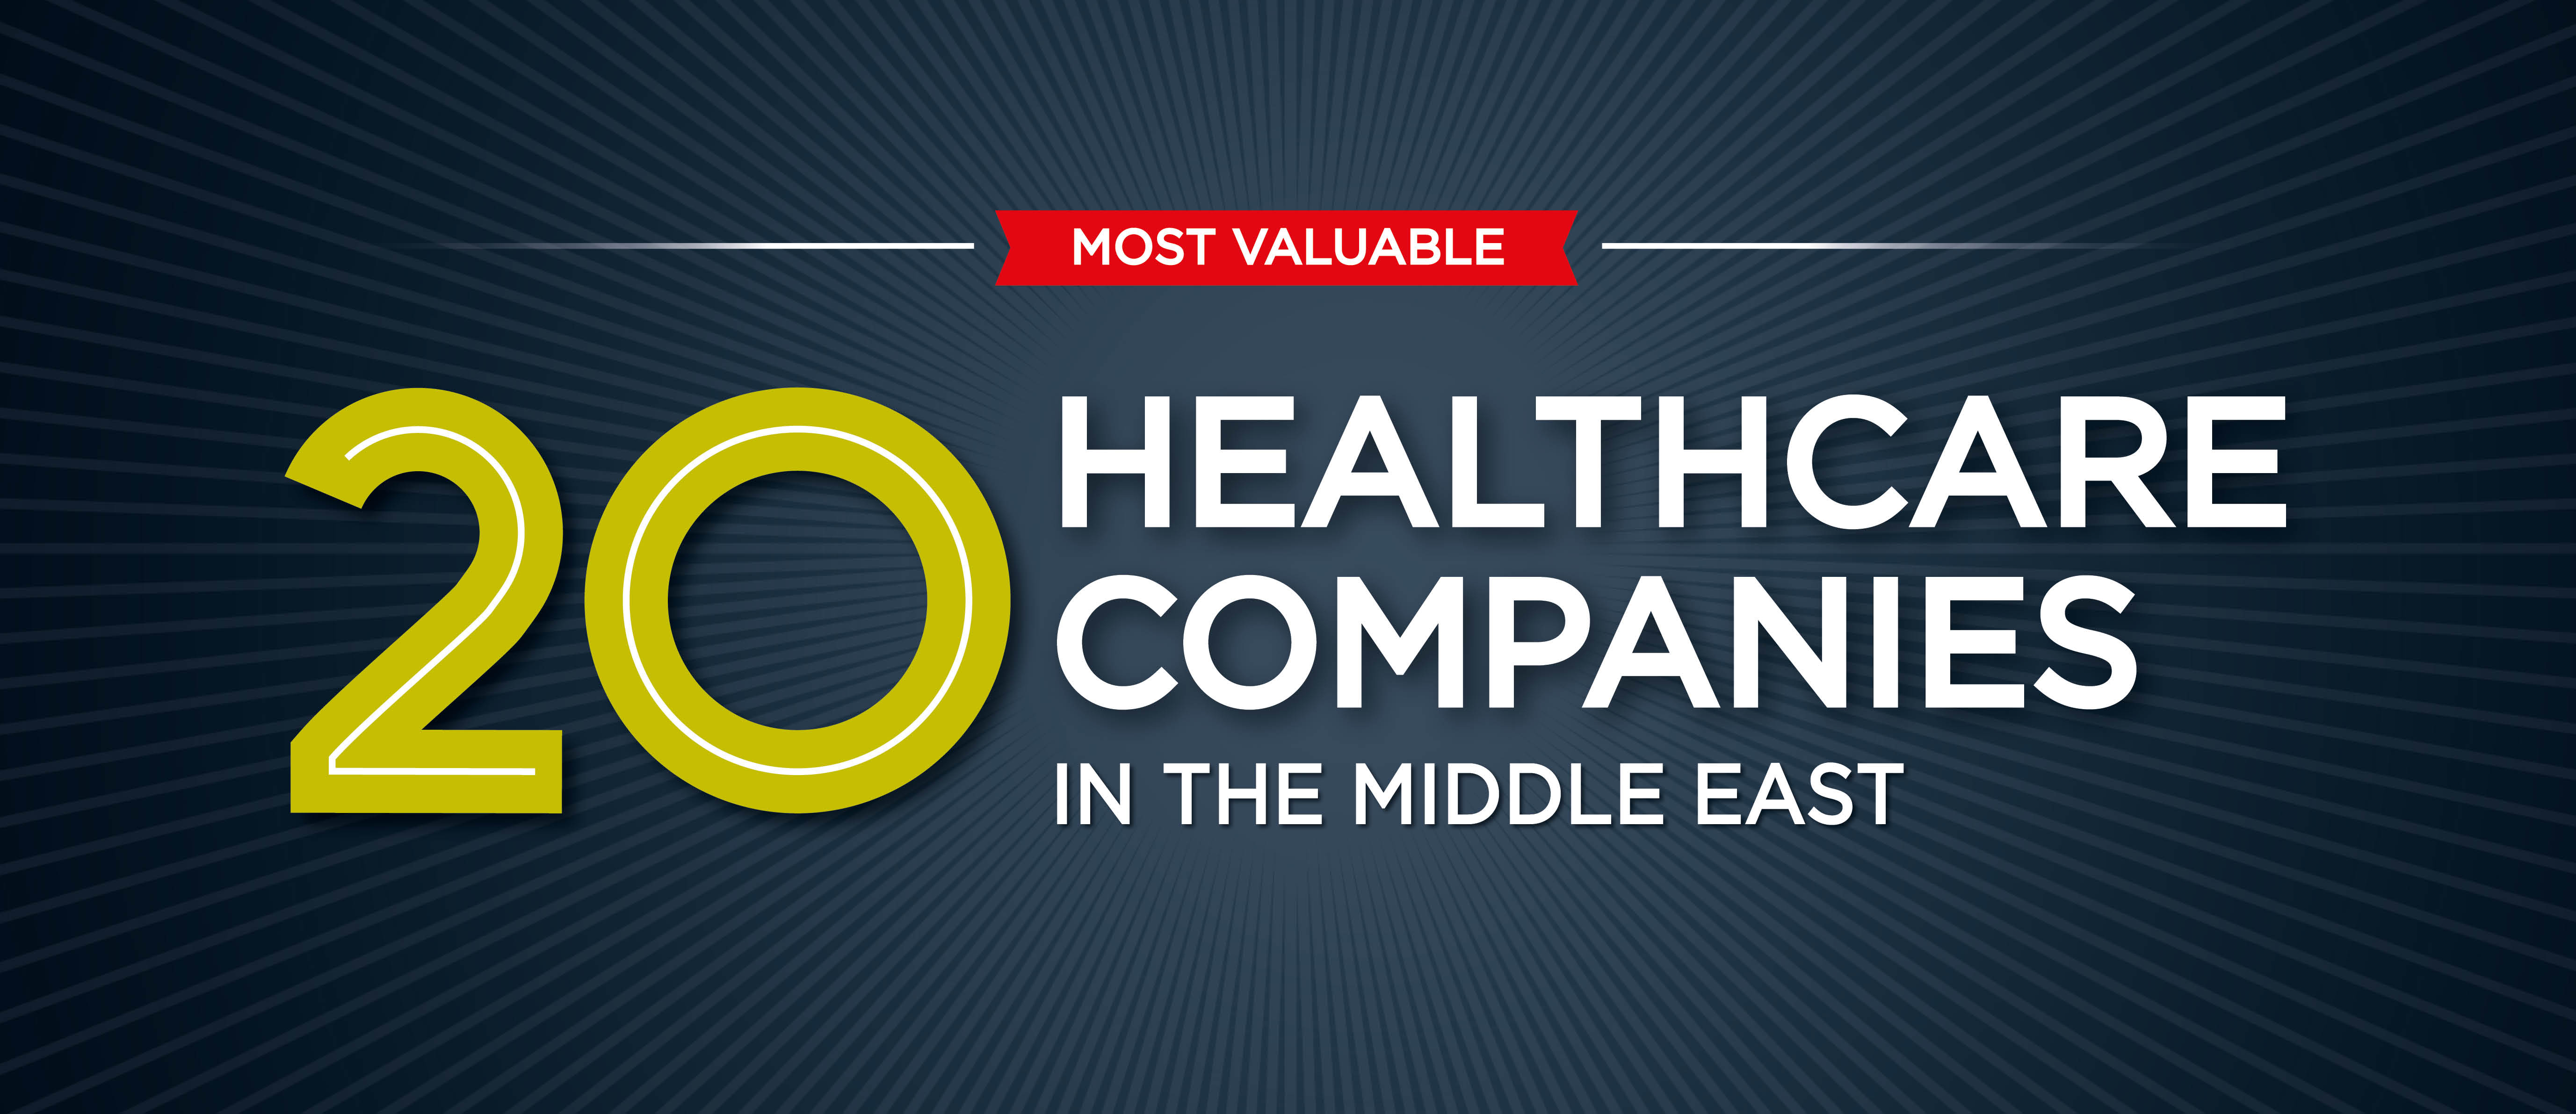 Most Valuable Healthcare Companies 2020